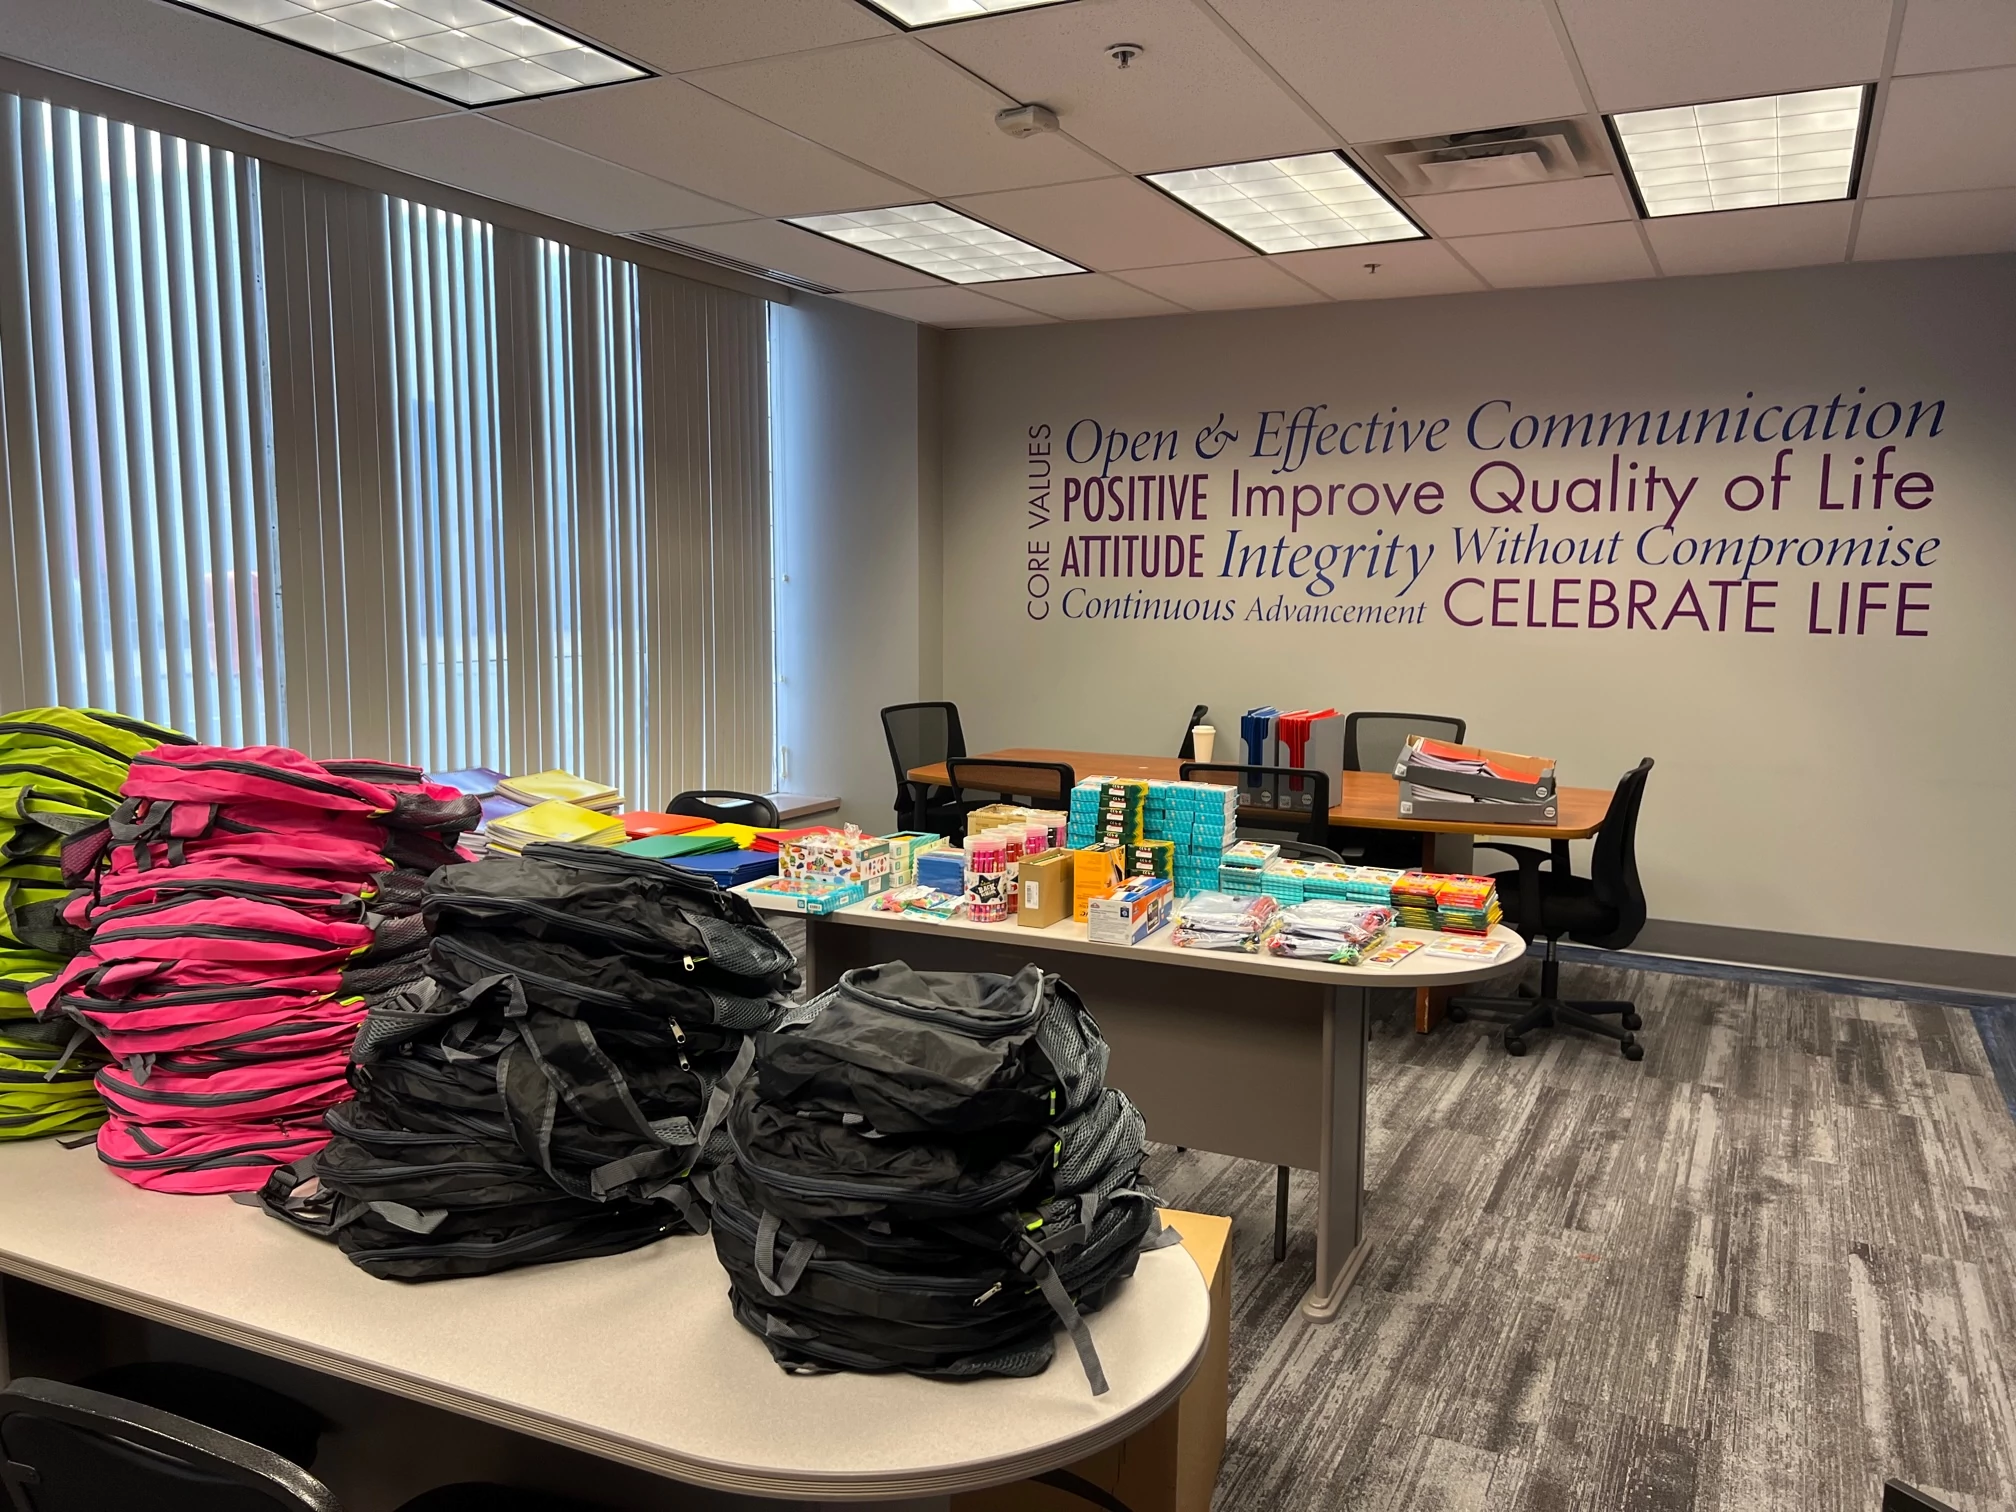 Our Erie Office has given away roughly 200 Back-to-School Backpacks to our caregivers and their families.  These photos show just some of the 